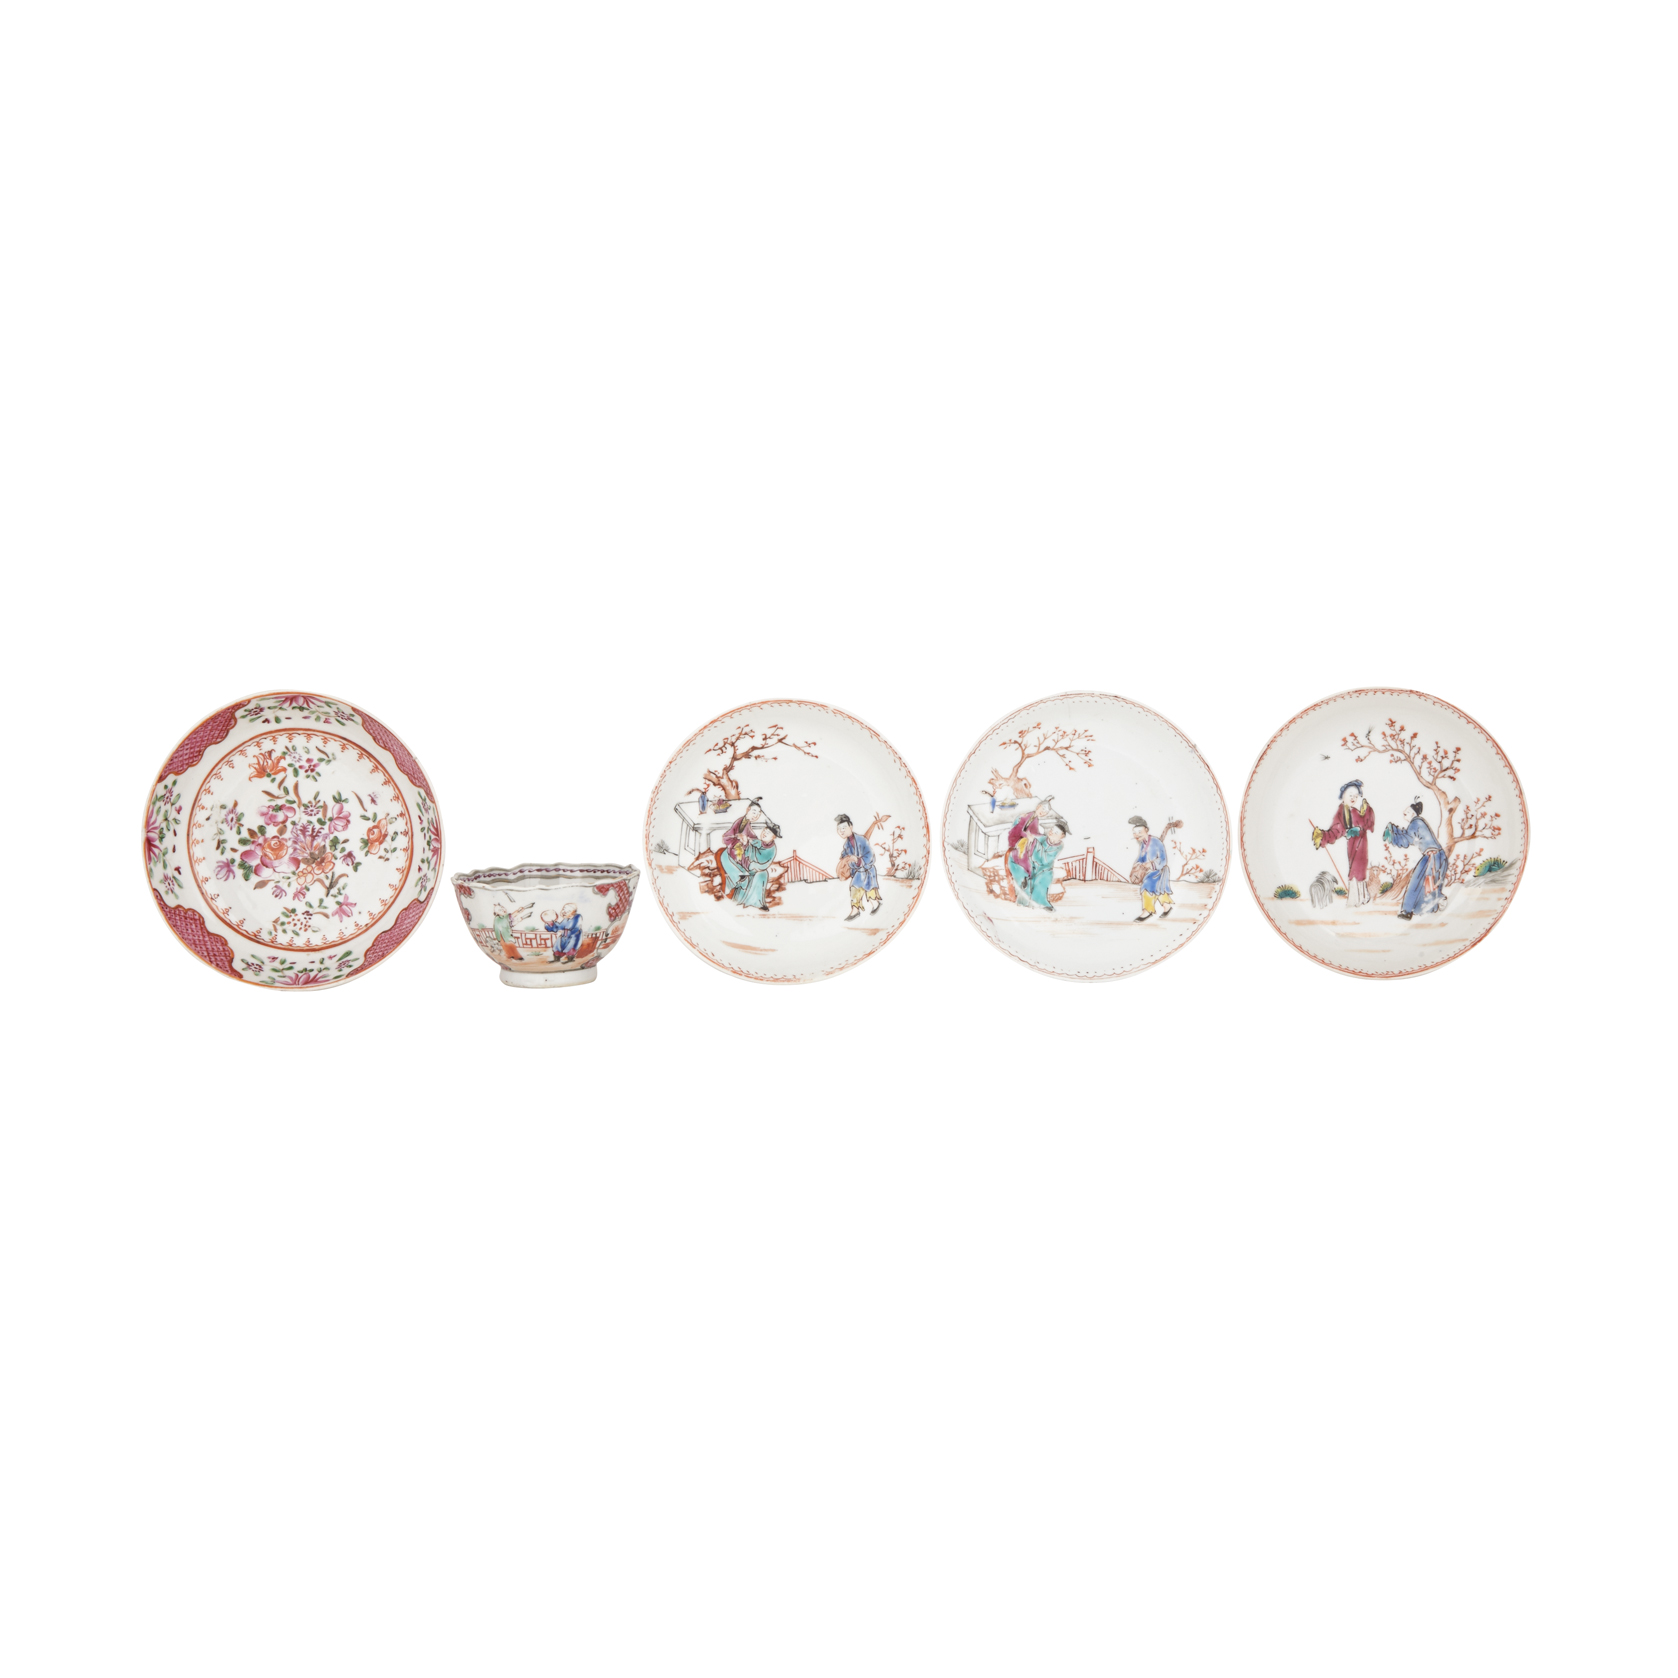 Four Small Dishes together with a Figural Cup, 18th/19th Century